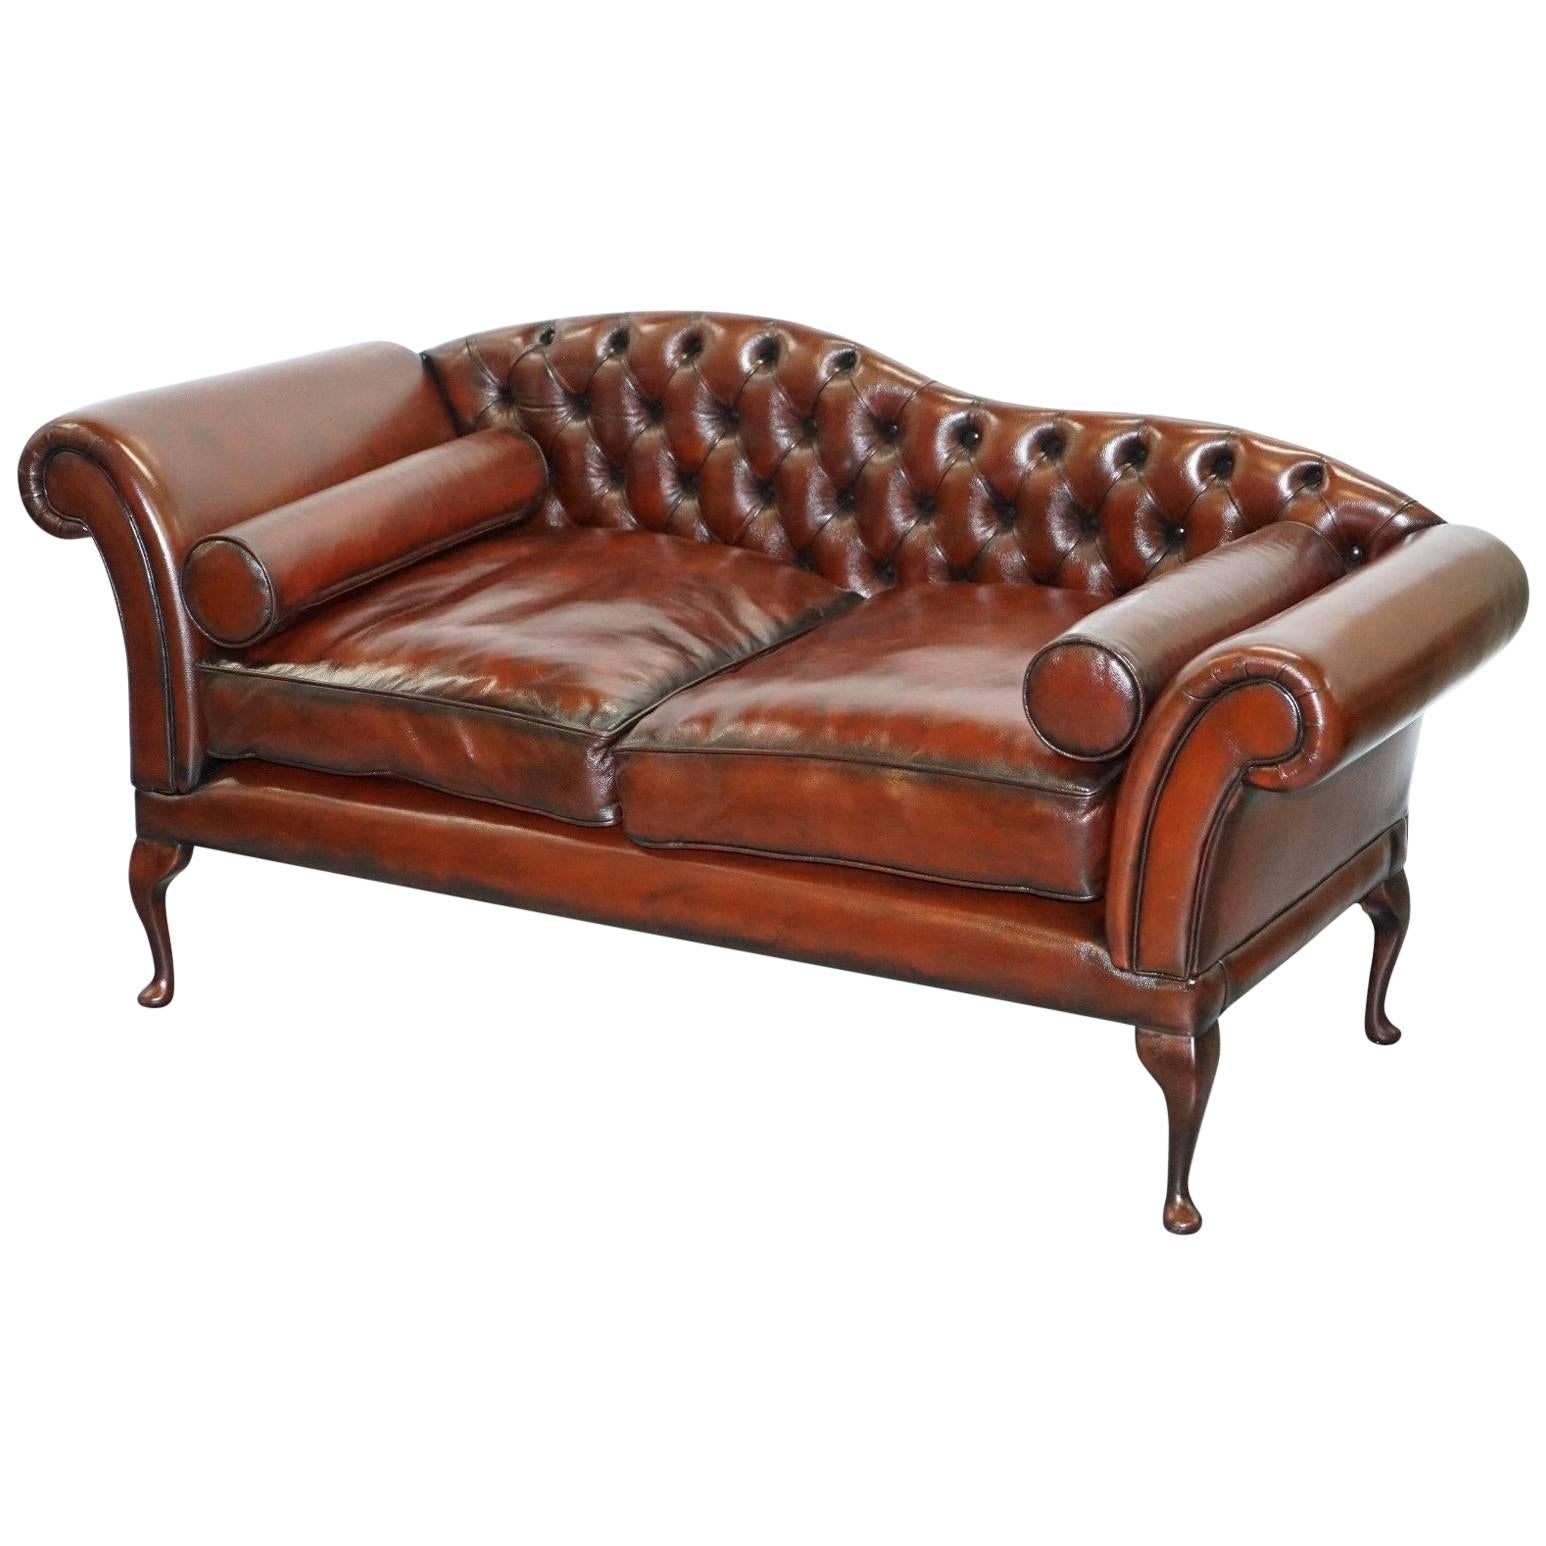 Fully Restored Chesterfield Buttoned Cigar Brown Leather Chaise Longue Sofa